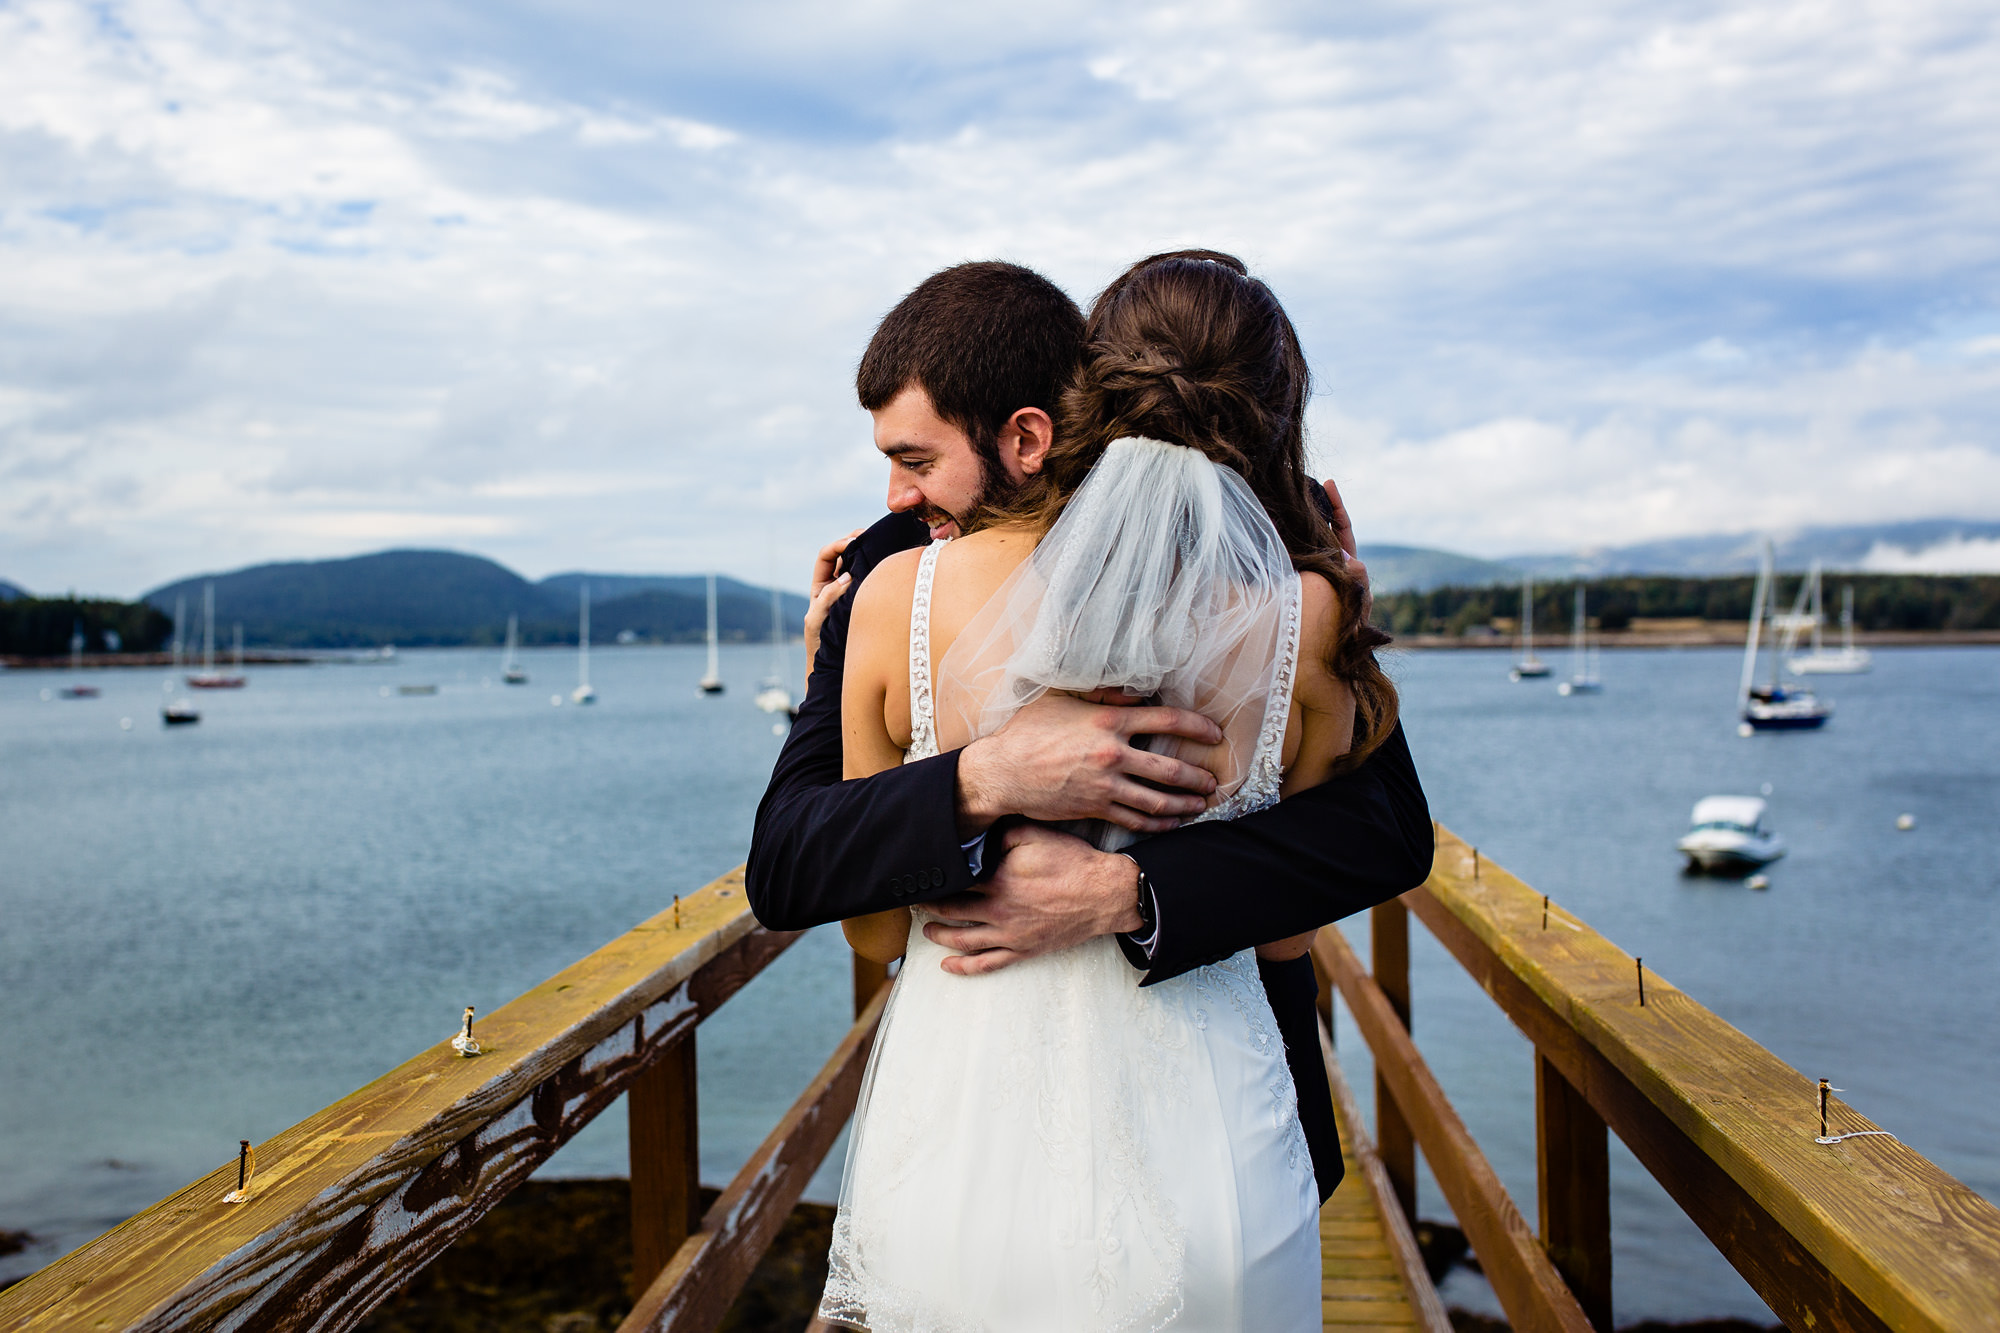 A first look at an elopement in Southwest Harbor on Mount Desert Island